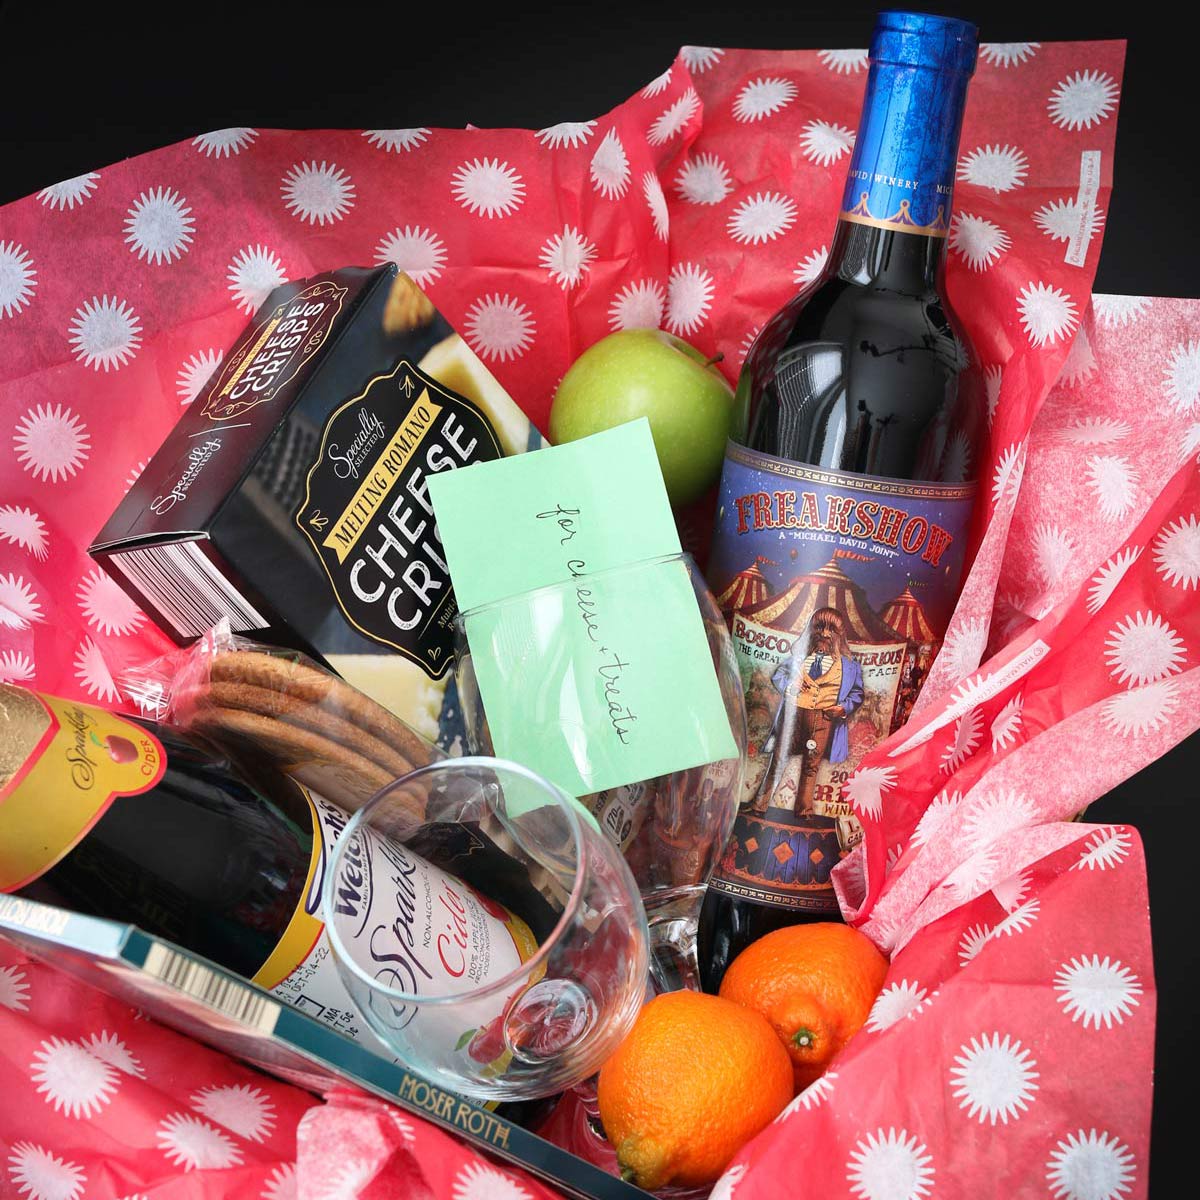 close up of wine and cheese gift basket lined with red tissue paper.